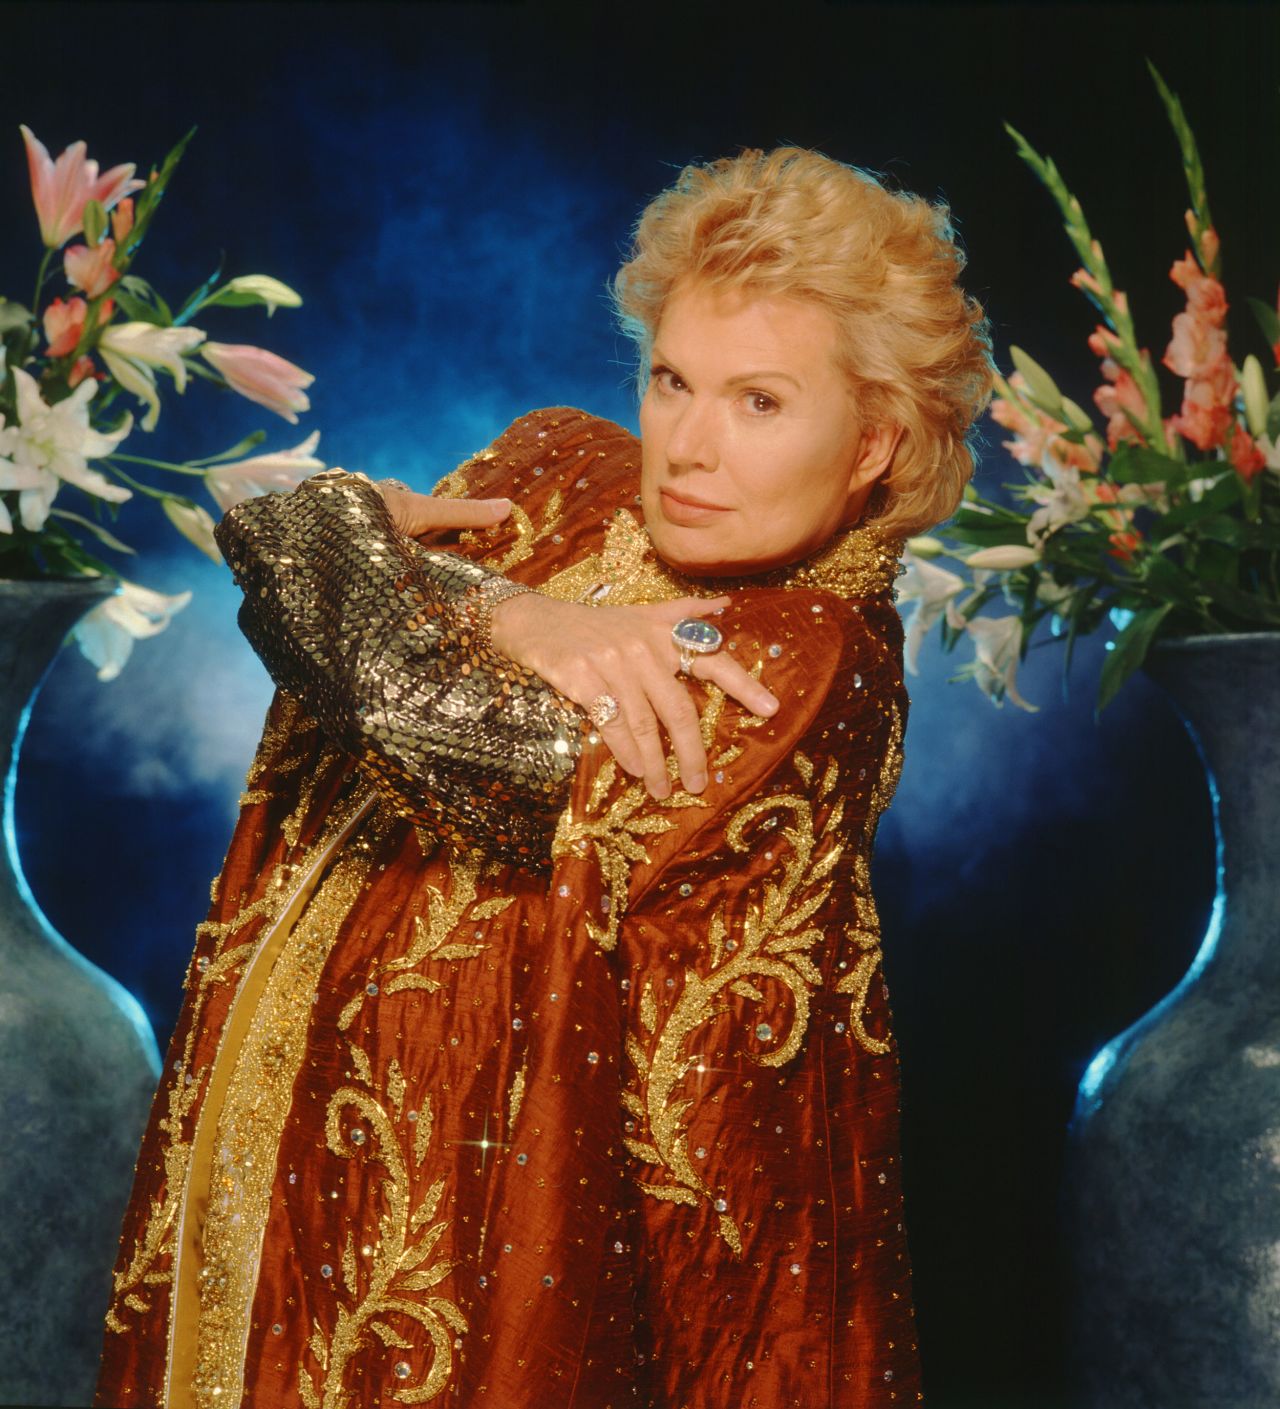 What happened to astrologer Walter Mercado? This Netflix documentary tells of his fate.